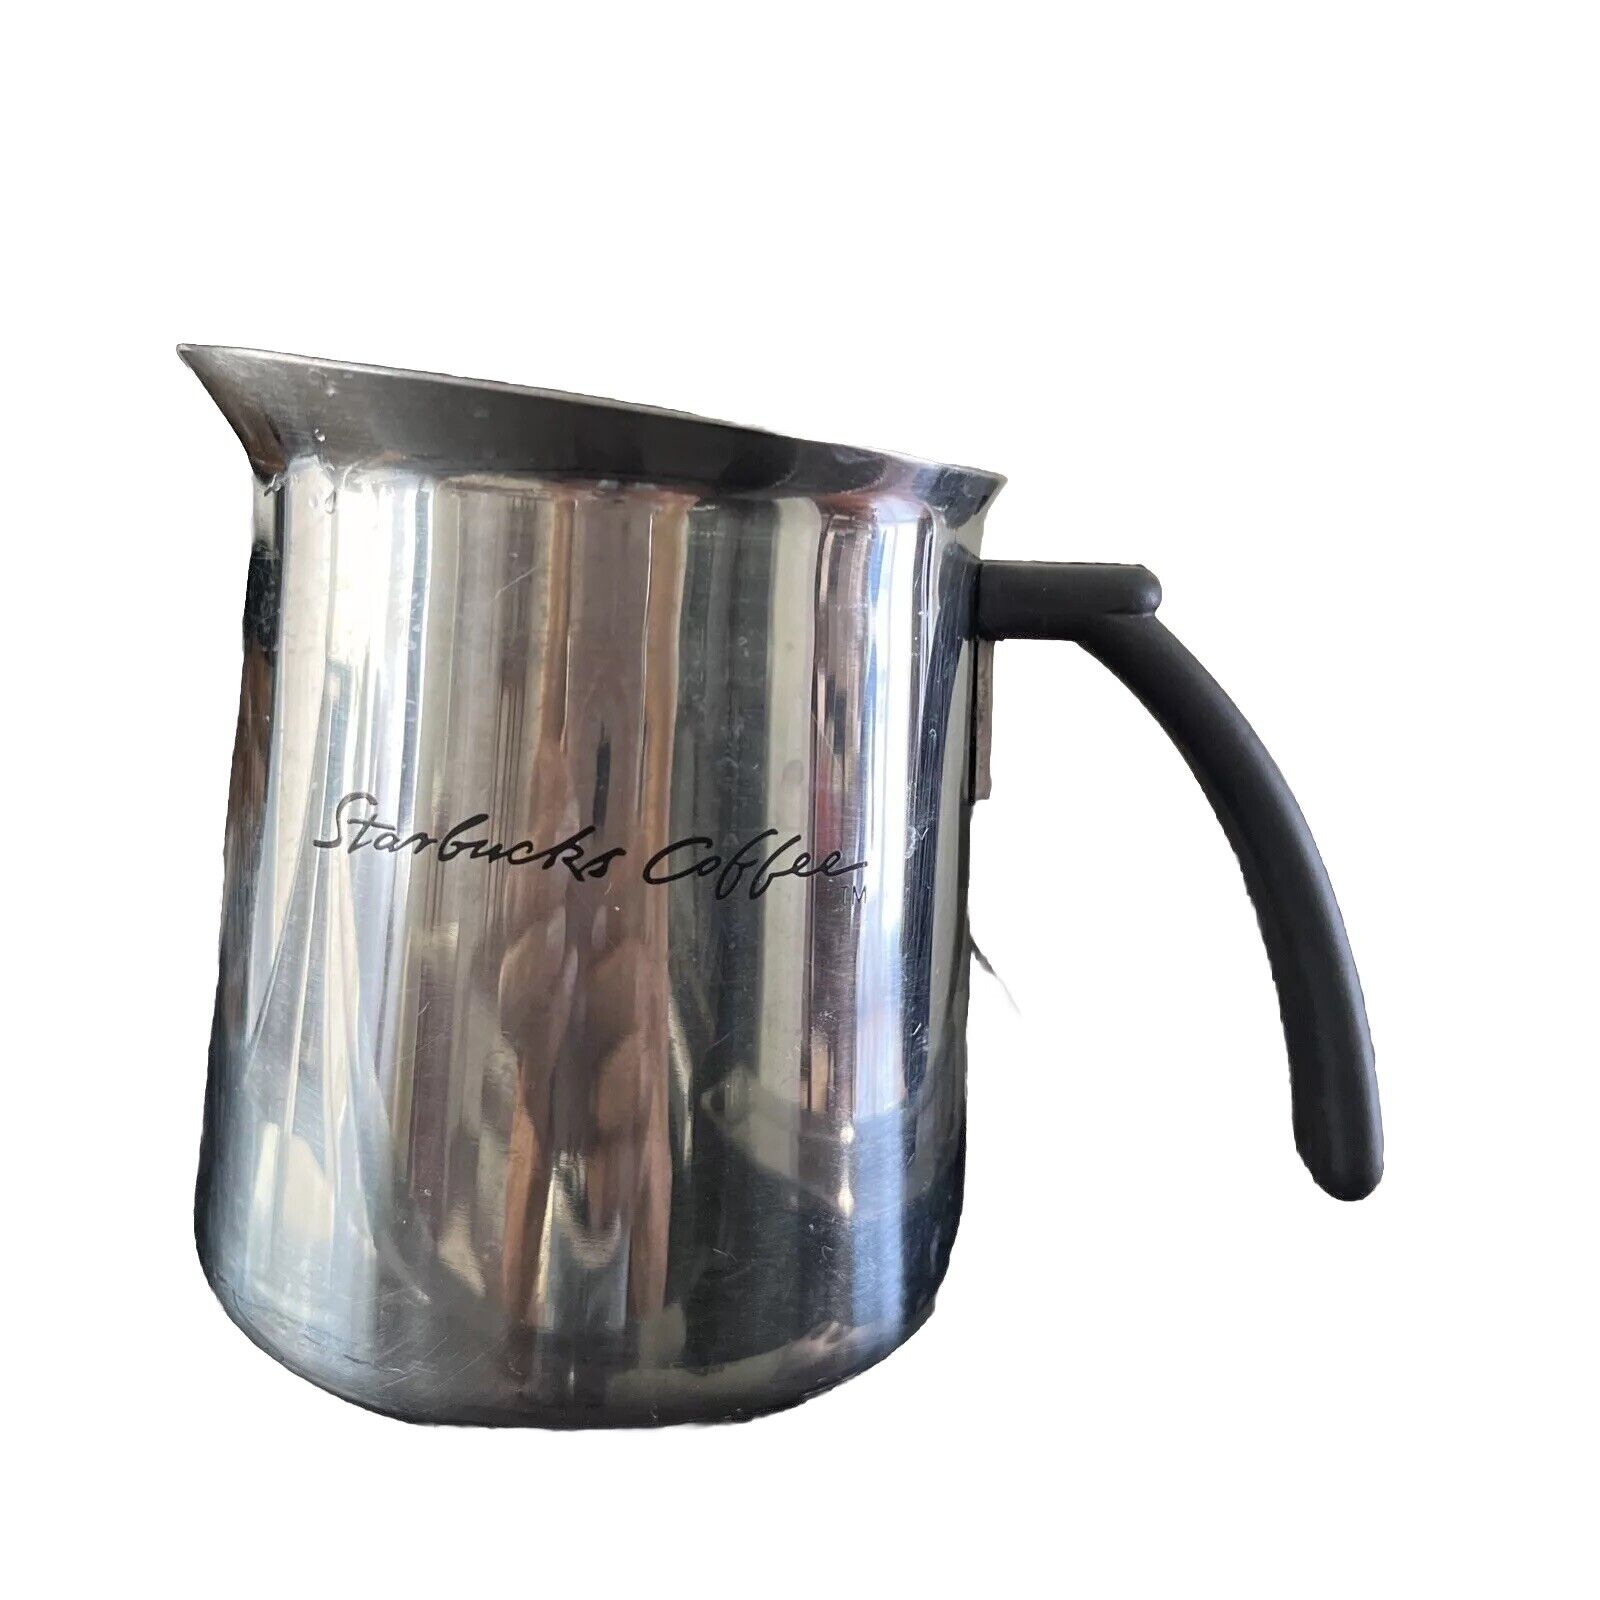 2000 Starbucks Barista 18/8 Stainless Steel Frothing Pitcher Coffee Espresso 